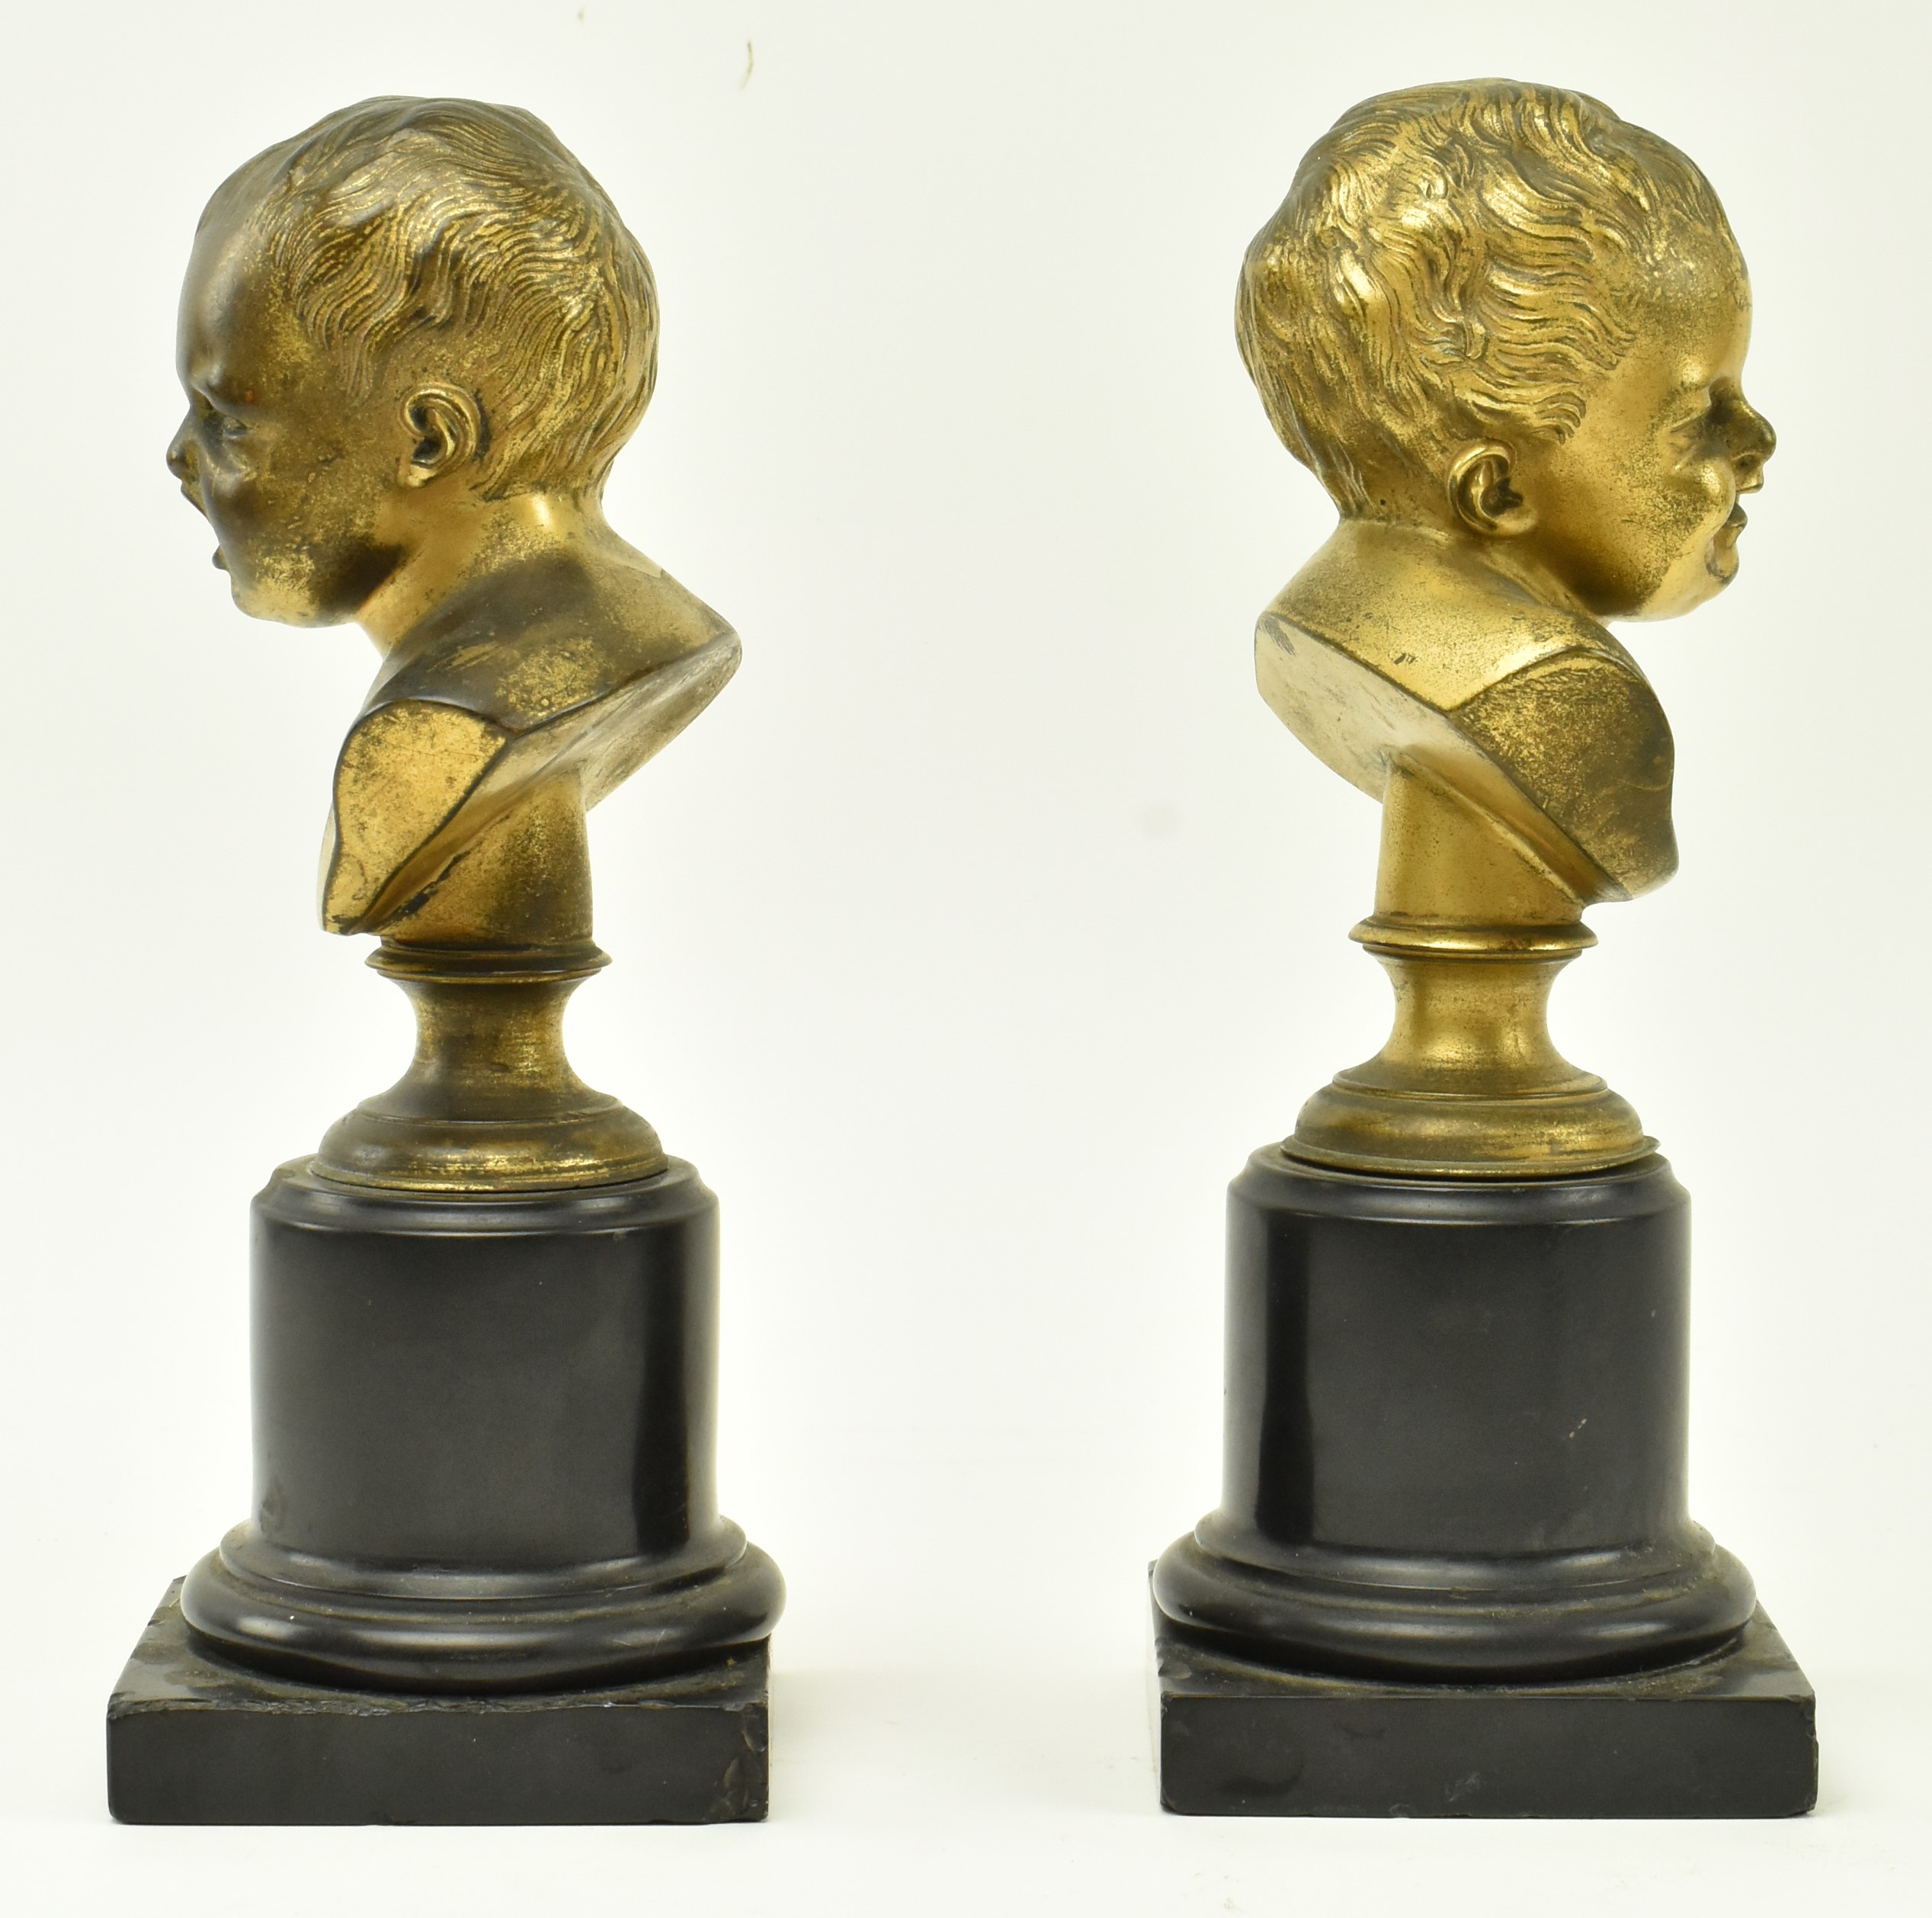 PAIR OF VICTORIAN 19TH CENTURY BRONZE CRYING INFANT BUSTS - Image 4 of 7